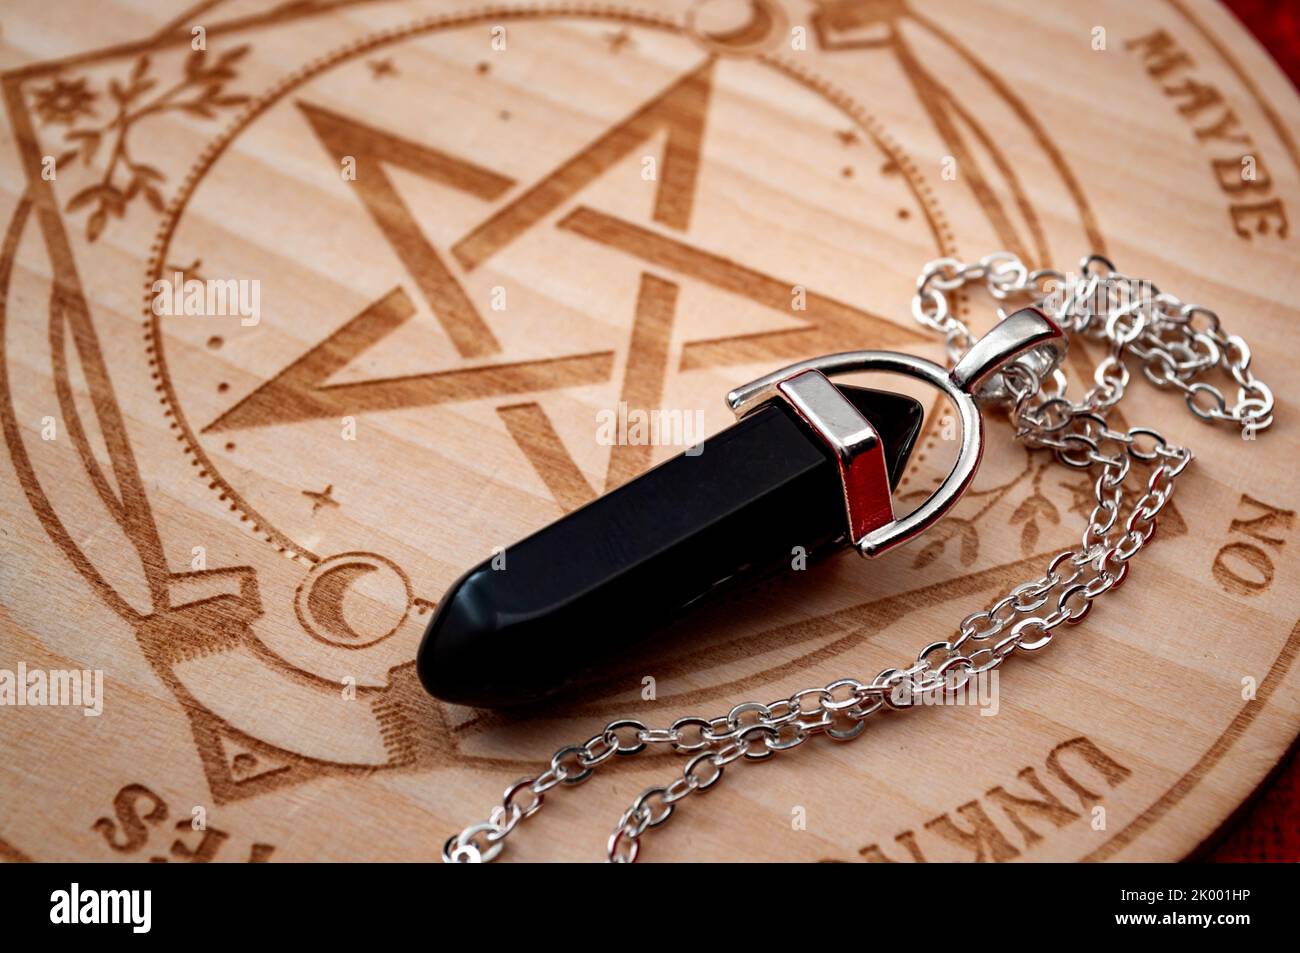 Dowsing pendulum with black gemstone next to hardwood divination chart on red velvet backgrounds concept for mystic magic spell, advanced esoteric sym Stock Photo